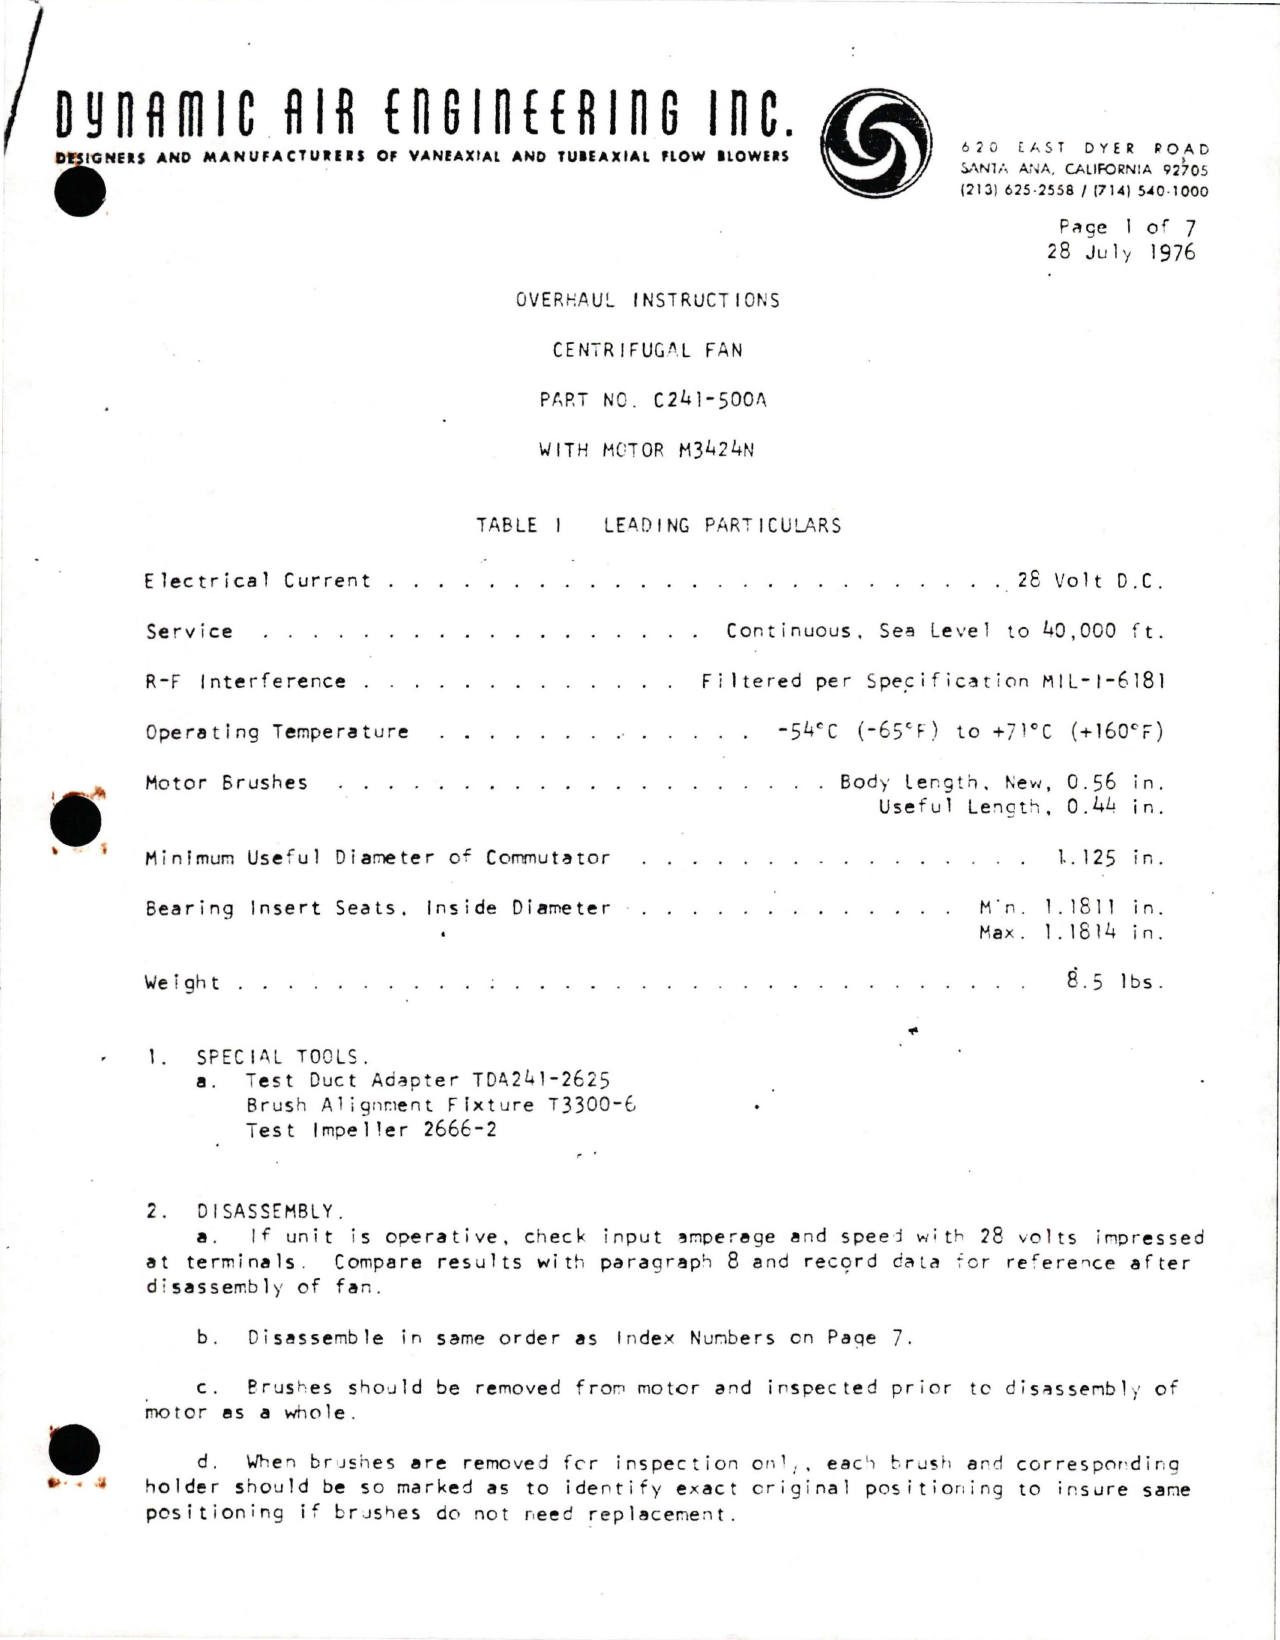 Sample page 1 from AirCorps Library document: Overhaul Instructions for Centrifugal Fan - Part C241-500A - Motor M3424N